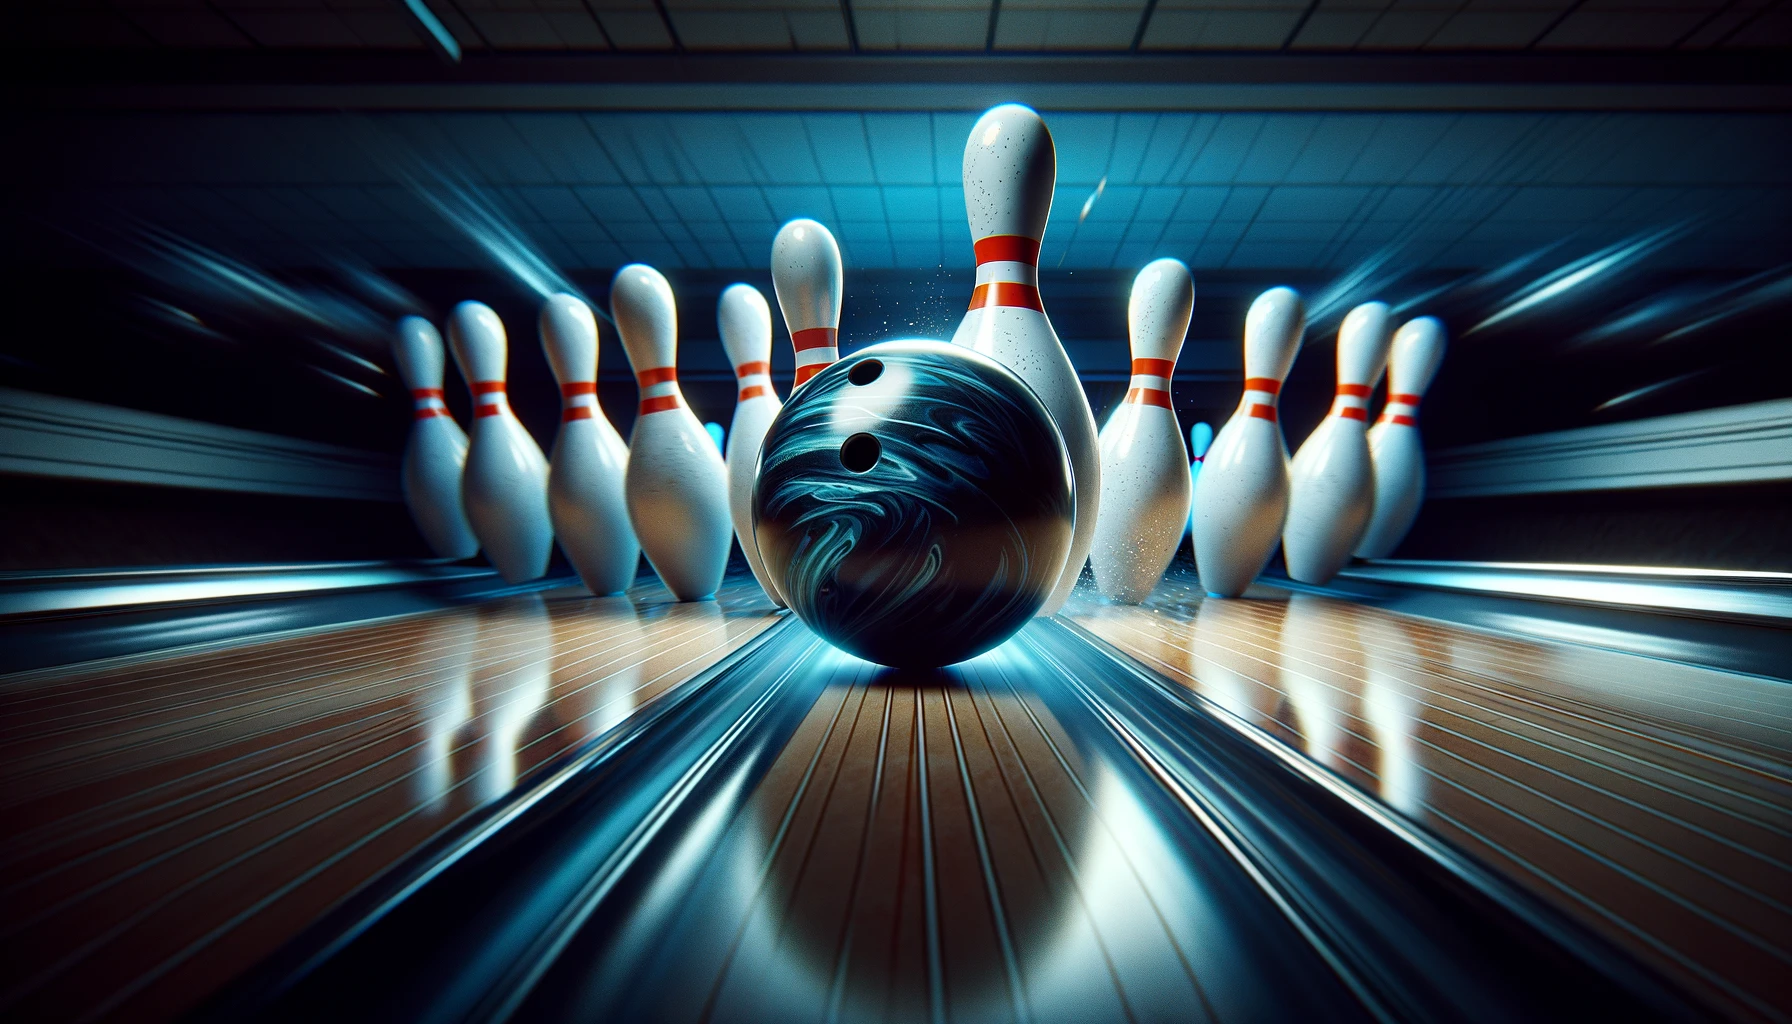 The exciting moment when a bowling ball strikes the pins. 